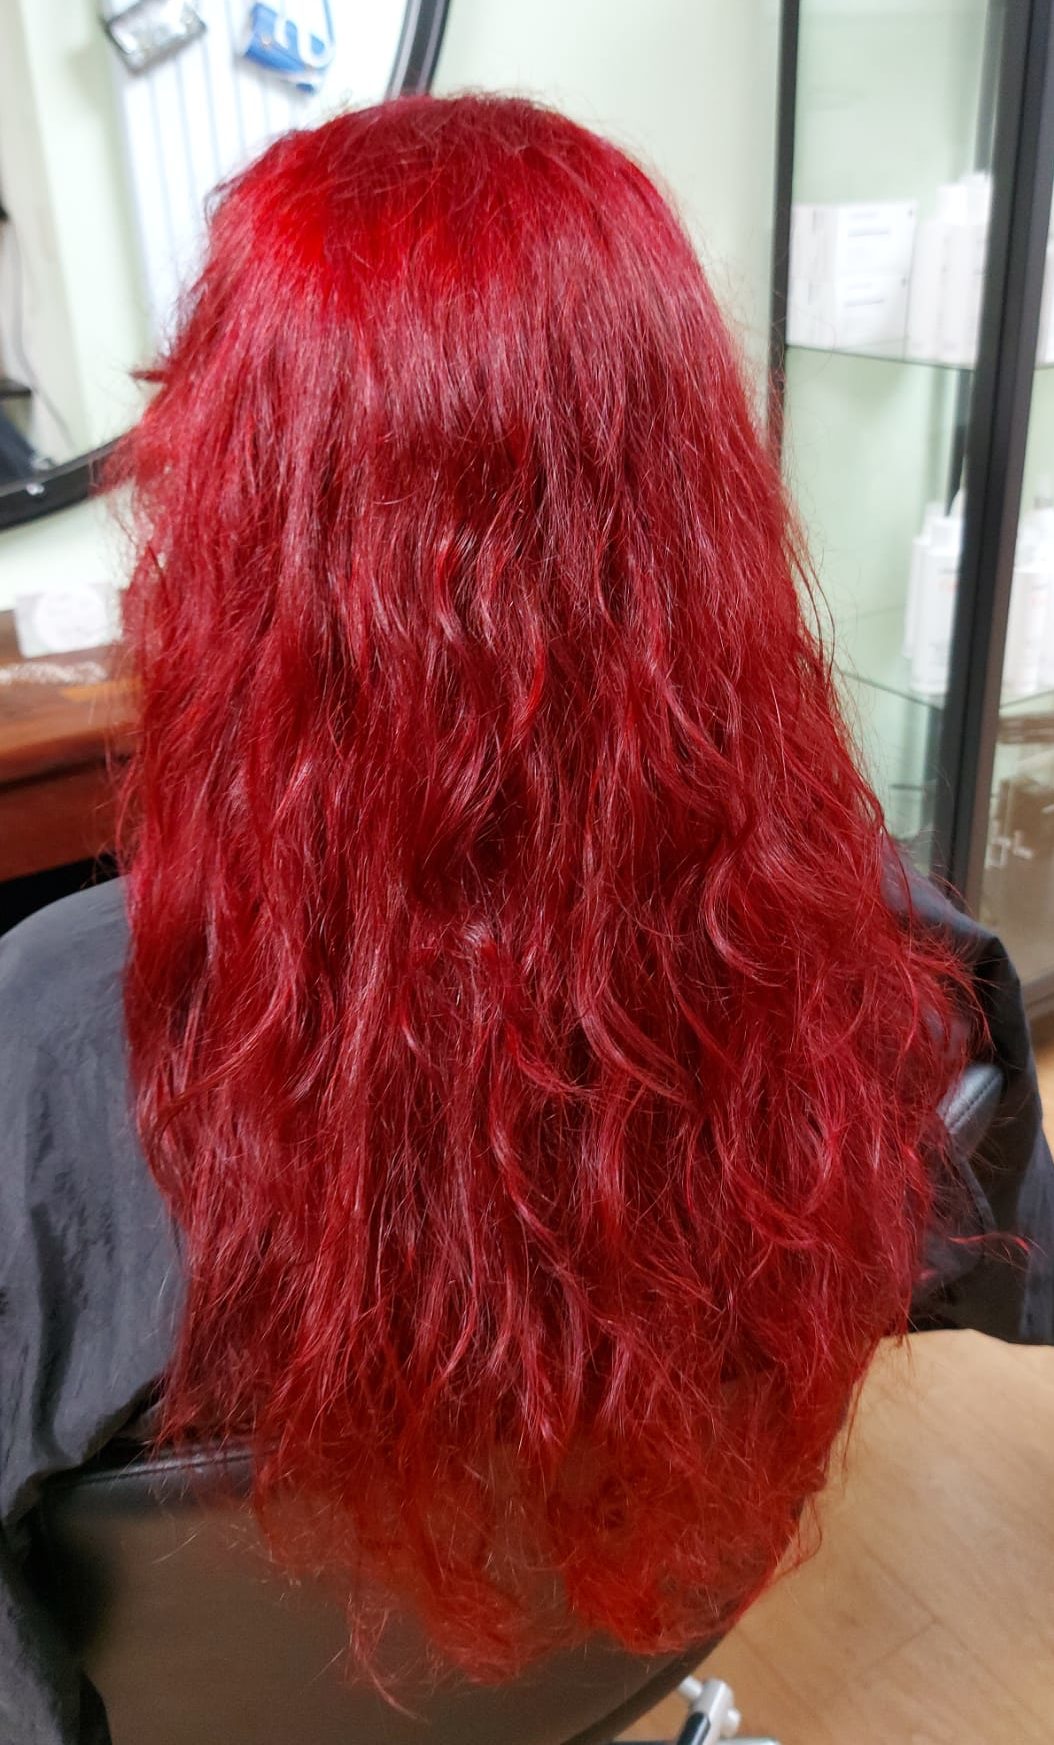 Long red